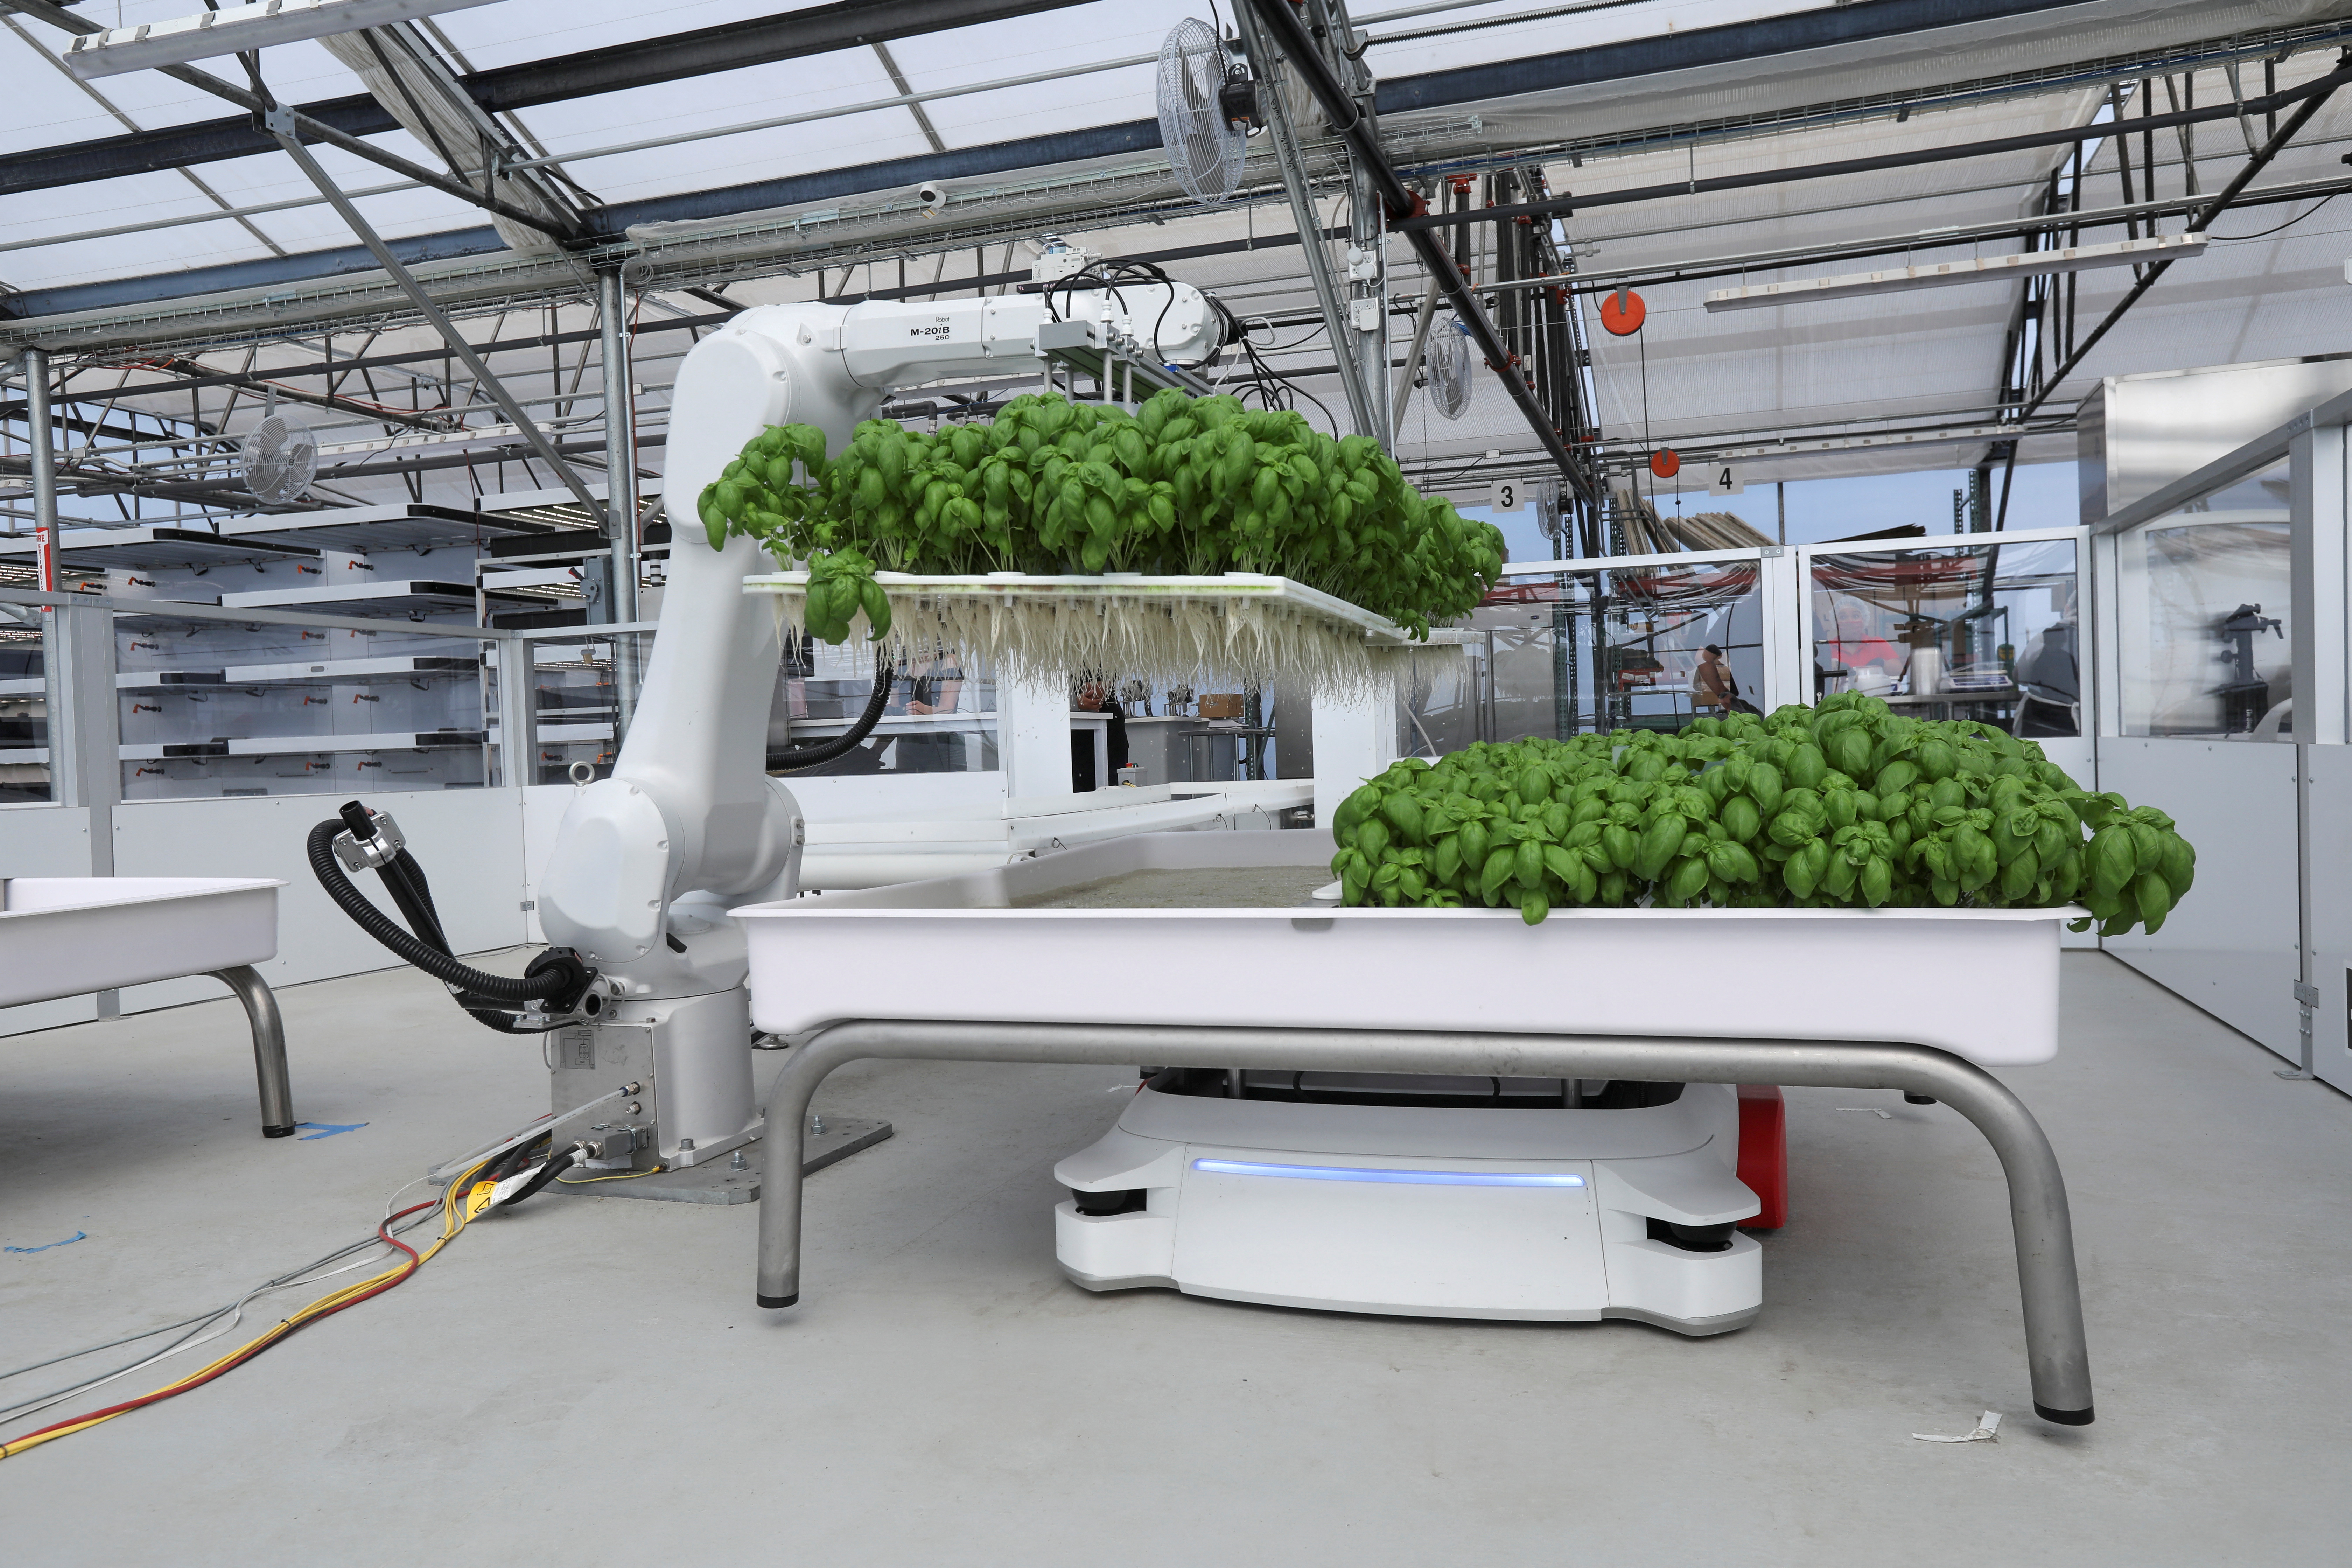 A robotic arm system named Ada lifts Genovese Basil plants for its roots to be inspected at the Iron Ox greenhouse in Gilroy, California